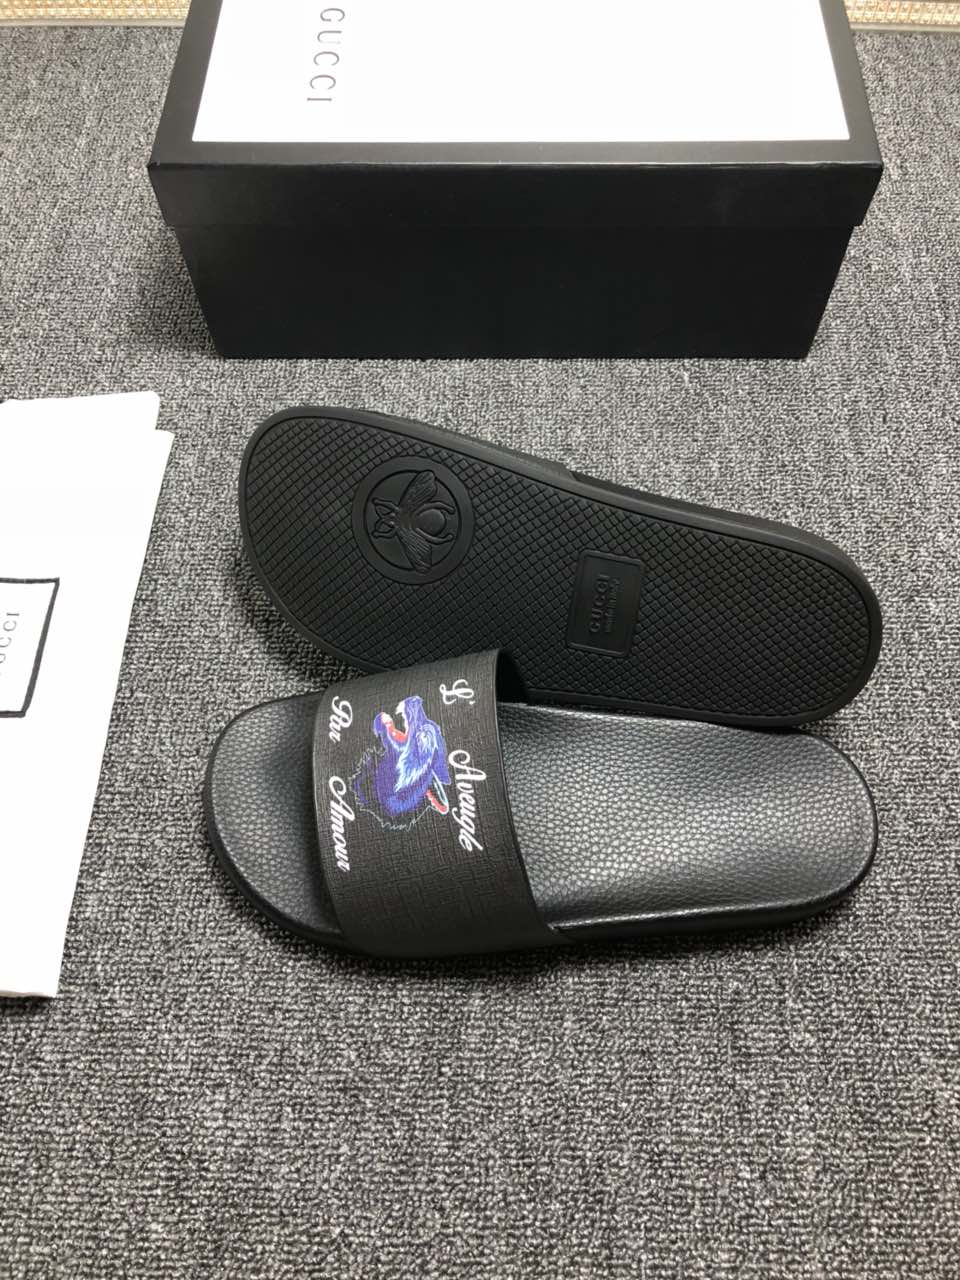 High Quality Gucci Black slide sandal With Wolf Design GO_GC040